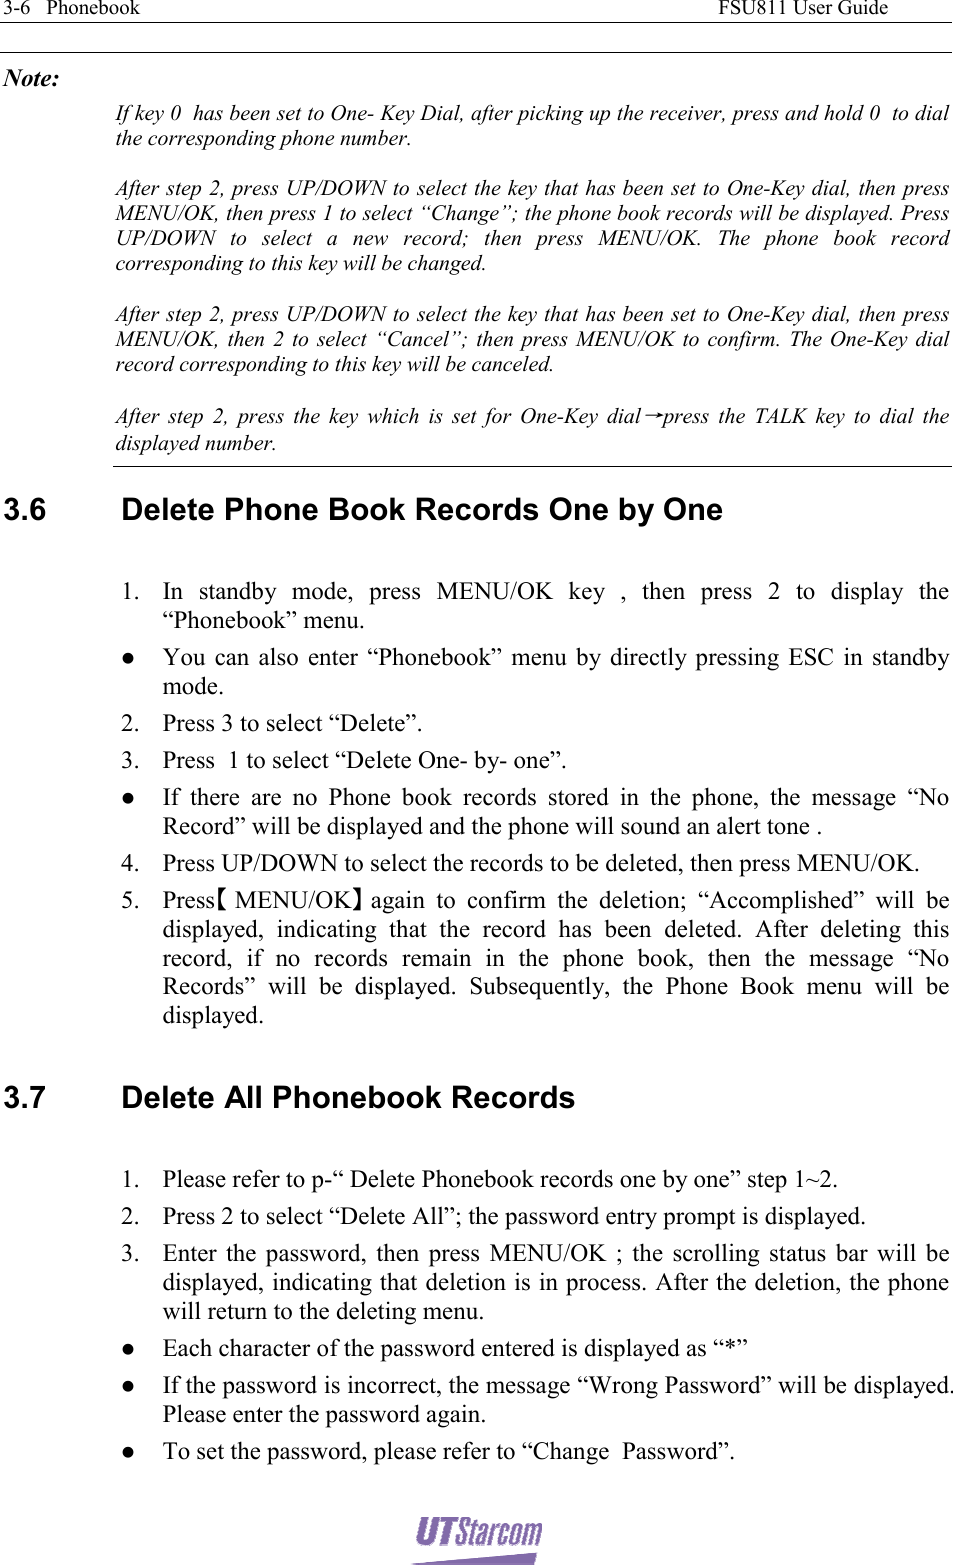 3-6   Phonebook                                                                                                               FSU811 User Guide  Note: If key 0  has been set to One- Key Dial, after picking up the receiver, press and hold 0  to dial the corresponding phone number. After step 2, press UP/DOWN to select the key that has been set to One-Key dial, then press MENU/OK, then press 1 to select “Change”; the phone book records will be displayed. Press UP/DOWN to select a new record; then press MENU/OK. The phone book record corresponding to this key will be changed. After step 2, press UP/DOWN to select the key that has been set to One-Key dial, then press MENU/OK, then 2 to select “Cancel”; then press MENU/OK to confirm. The One-Key dial record corresponding to this key will be canceled. After step 2, press the key which is set for One-Key dial→press the TALK key to dial the displayed number. 3.6  Delete Phone Book Records One by One  1. In standby mode, press MENU/OK key , then press 2 to display the “Phonebook” menu. z You can also enter “Phonebook” menu by directly pressing ESC in standby mode. 2. Press 3 to select “Delete”. 3. Press  1 to select “Delete One- by- one”. z If there are no Phone book records stored in the phone, the message “No Record” will be displayed and the phone will sound an alert tone . 4. Press UP/DOWN to select the records to be deleted, then press MENU/OK. 5. Press【】MENU/OK again to confirm the deletion; “Accomplished” will be displayed, indicating that the record has been deleted. After deleting this record, if no records remain in the phone book, then the message “No Records” will be displayed. Subsequently, the Phone Book menu will be displayed.  3.7  Delete All Phonebook Records  1. Please refer to p-“ Delete Phonebook records one by one” step 1~2. 2. Press 2 to select “Delete All”; the password entry prompt is displayed. 3. Enter the password, then press MENU/OK ; the scrolling status bar will be displayed, indicating that deletion is in process. After the deletion, the phone will return to the deleting menu. z Each character of the password entered is displayed as “*” z If the password is incorrect, the message “Wrong Password” will be displayed. Please enter the password again. z To set the password, please refer to “Change  Password”.  